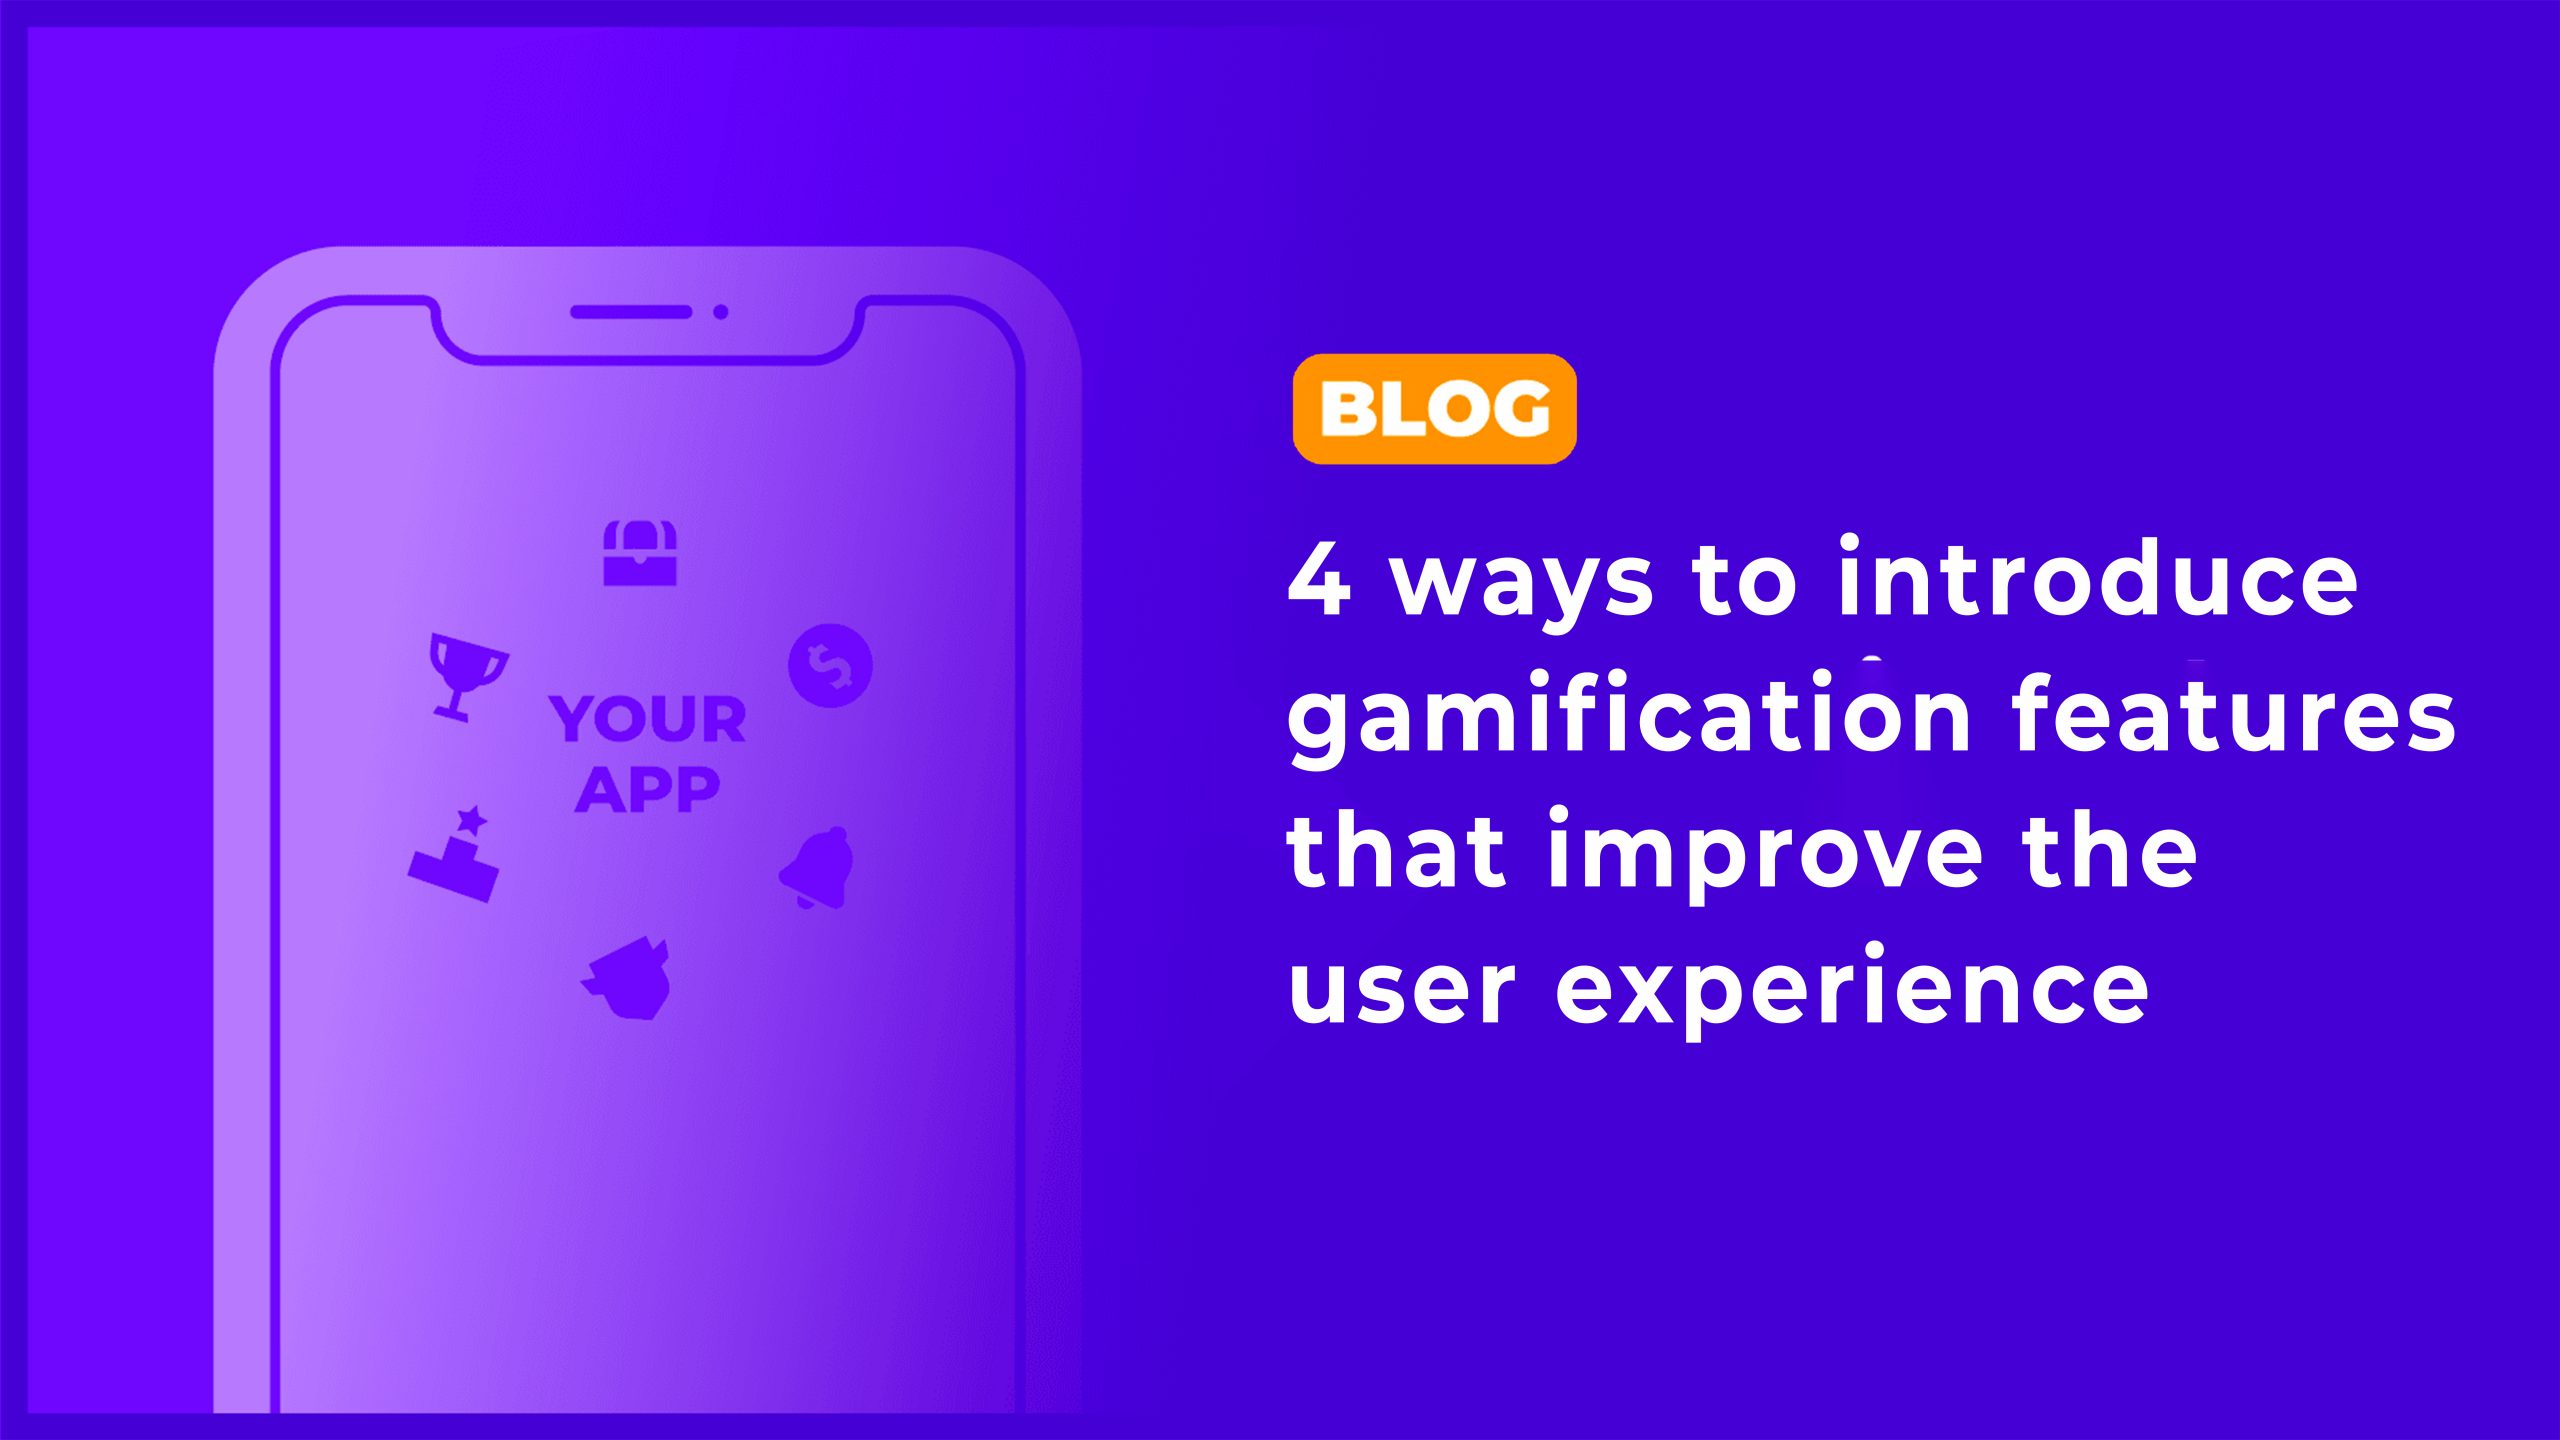 4 ways to introduce gamification features that improve the user experience